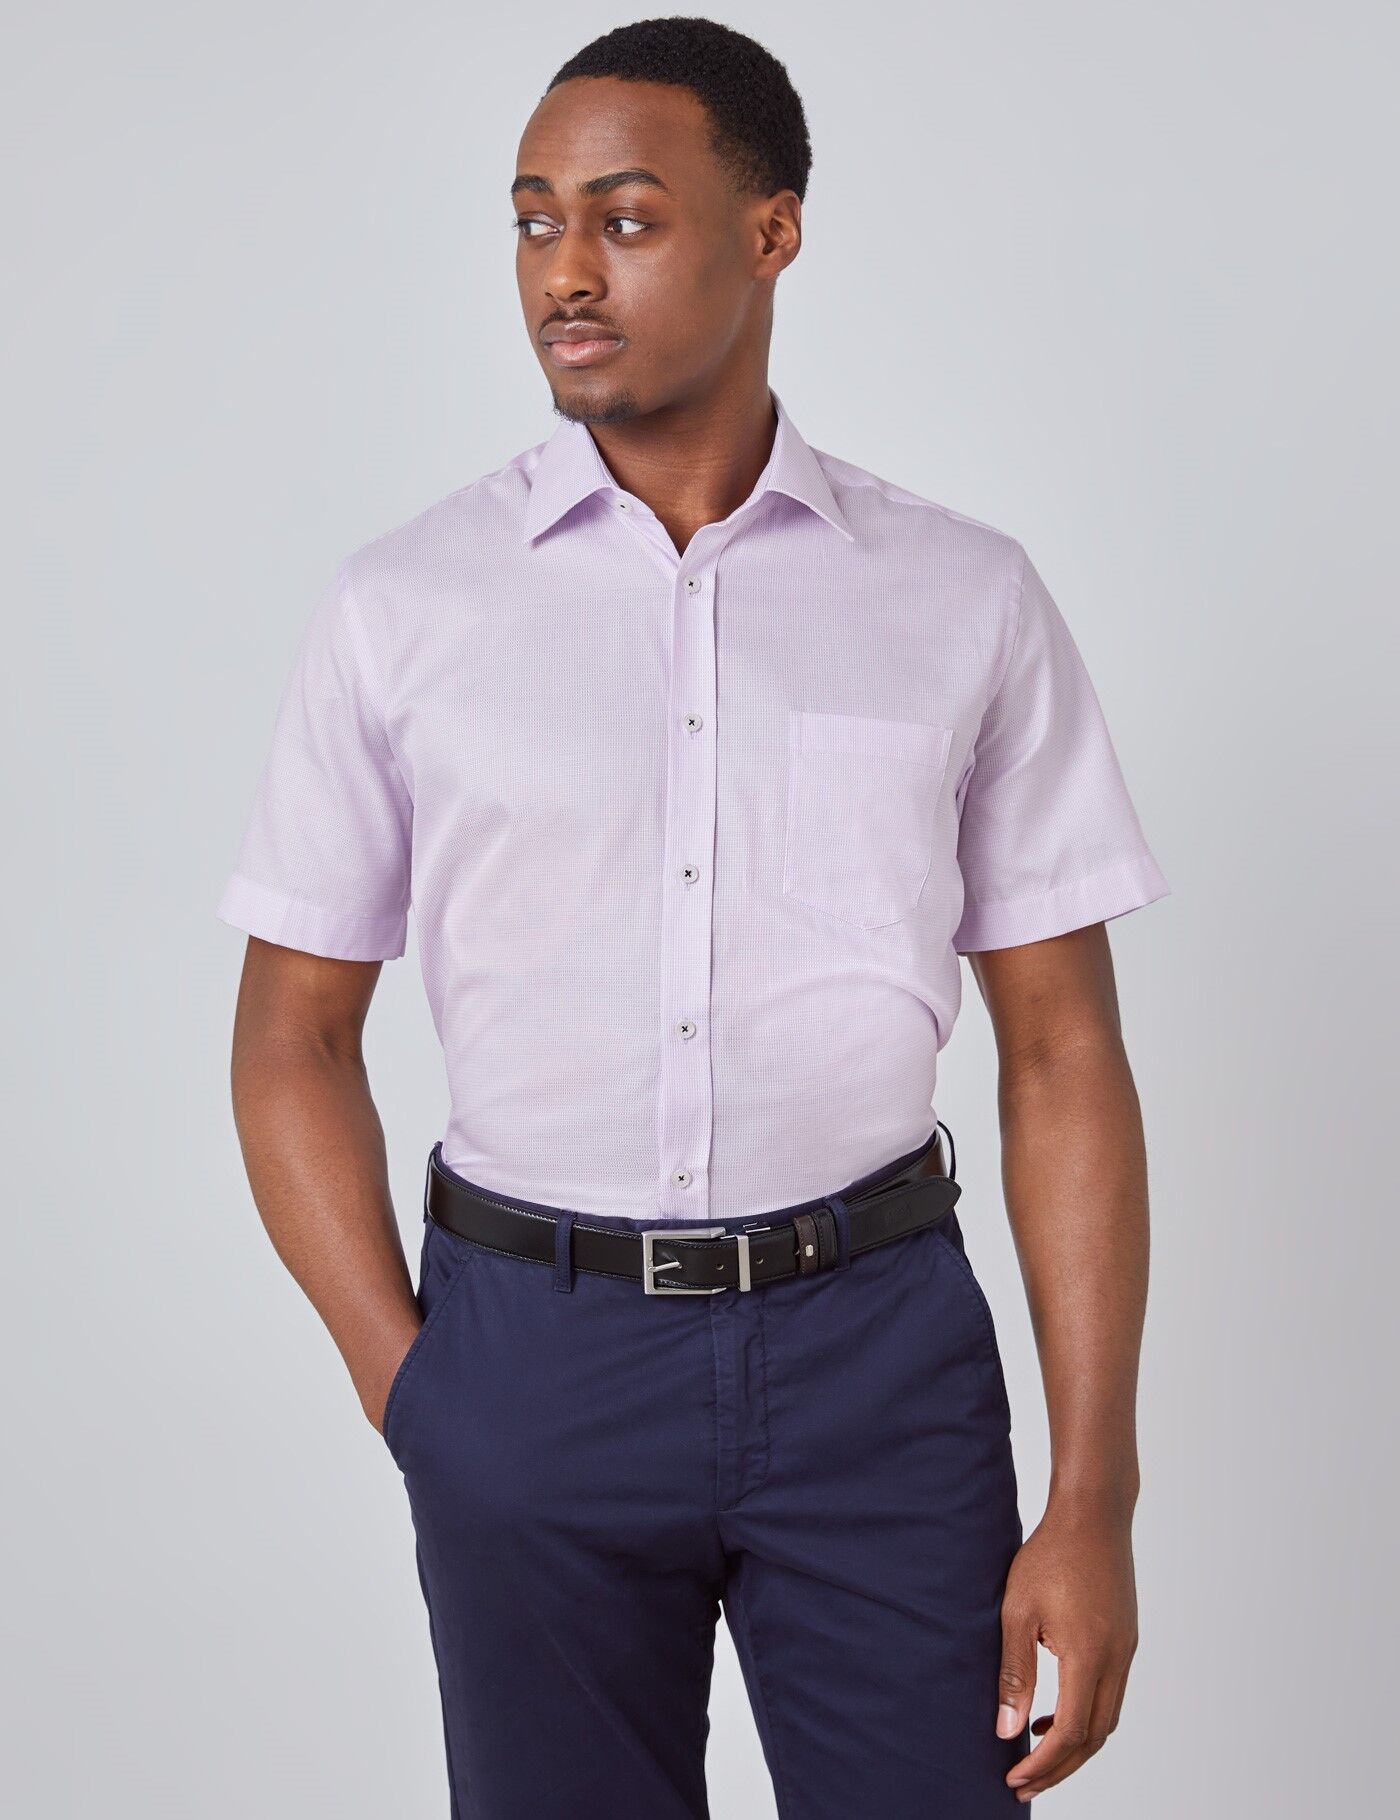 Hawes & Curtis Men's Fabric Interest Short Sleeve Shirt in White/Pink   Small   Hawes & Curtis